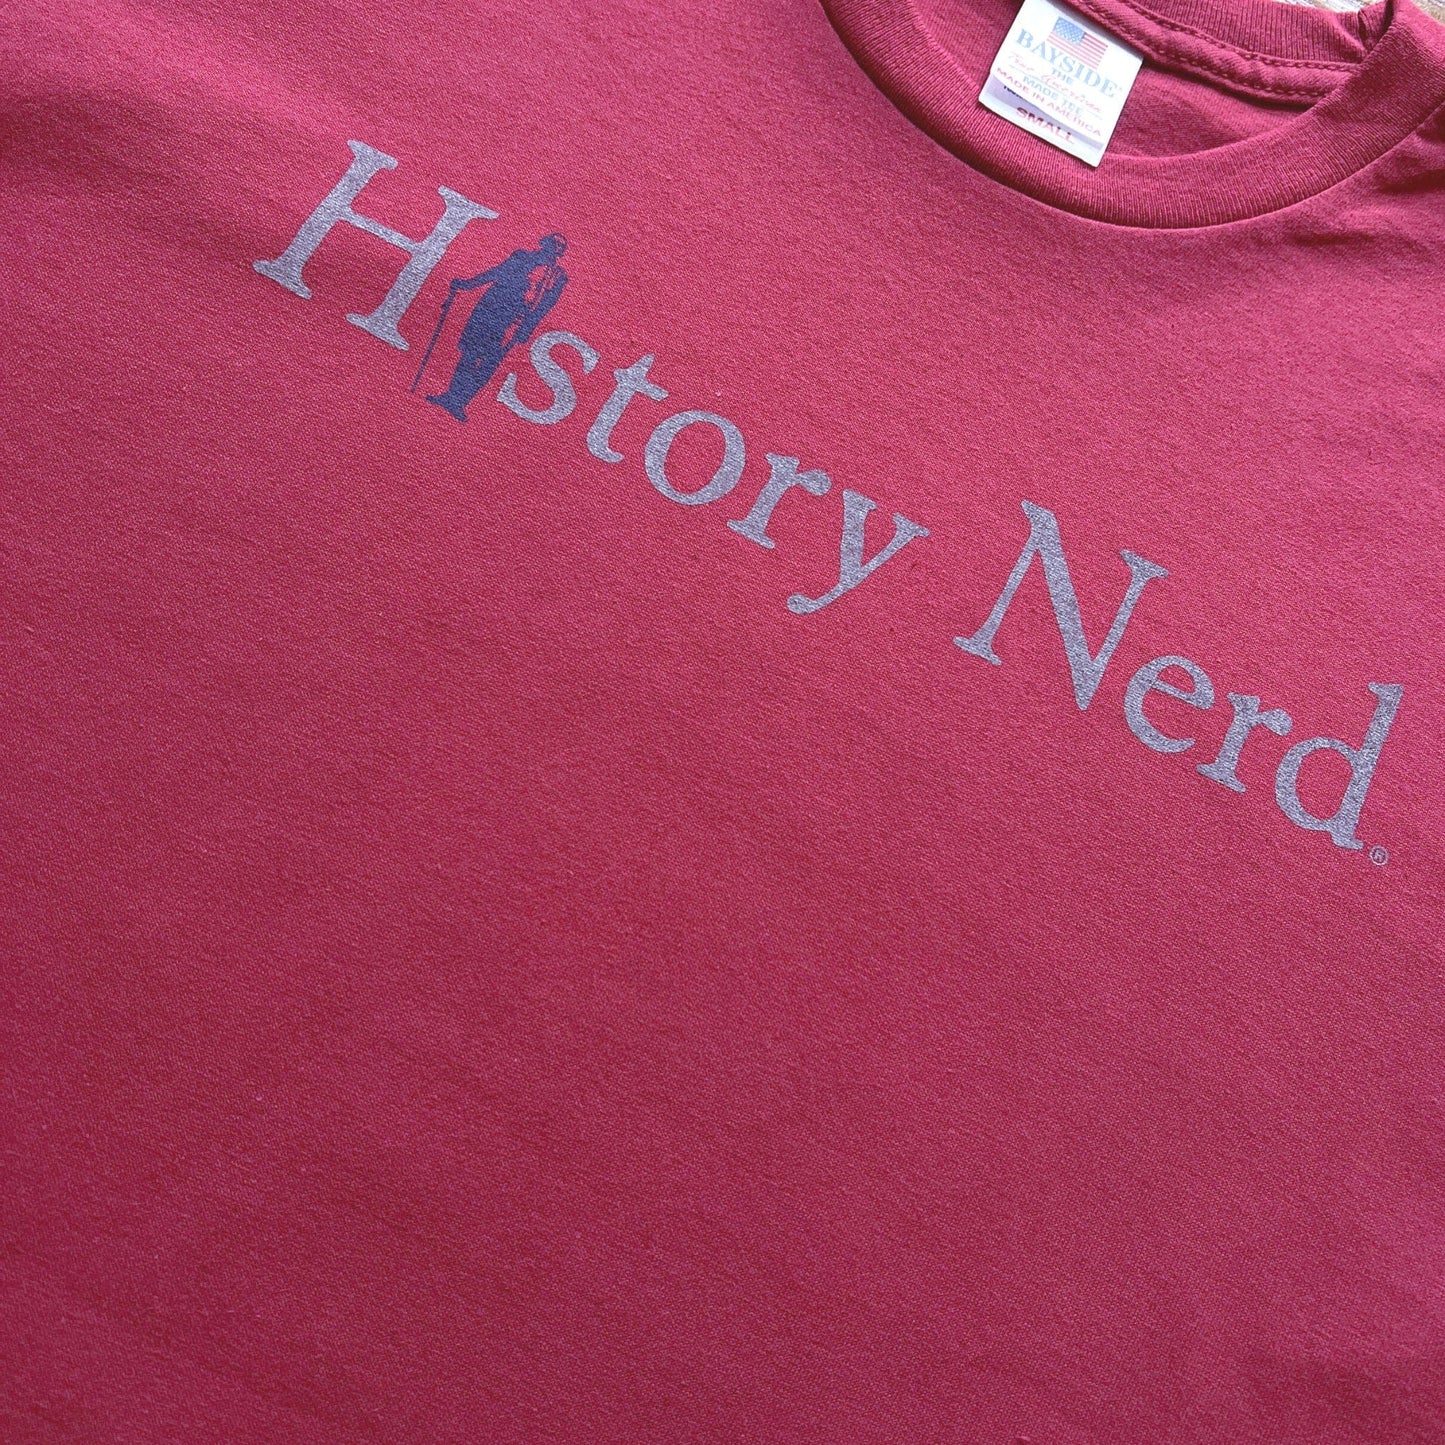 Close-up "History Nerd" shirt with George Washington — from the History List Store